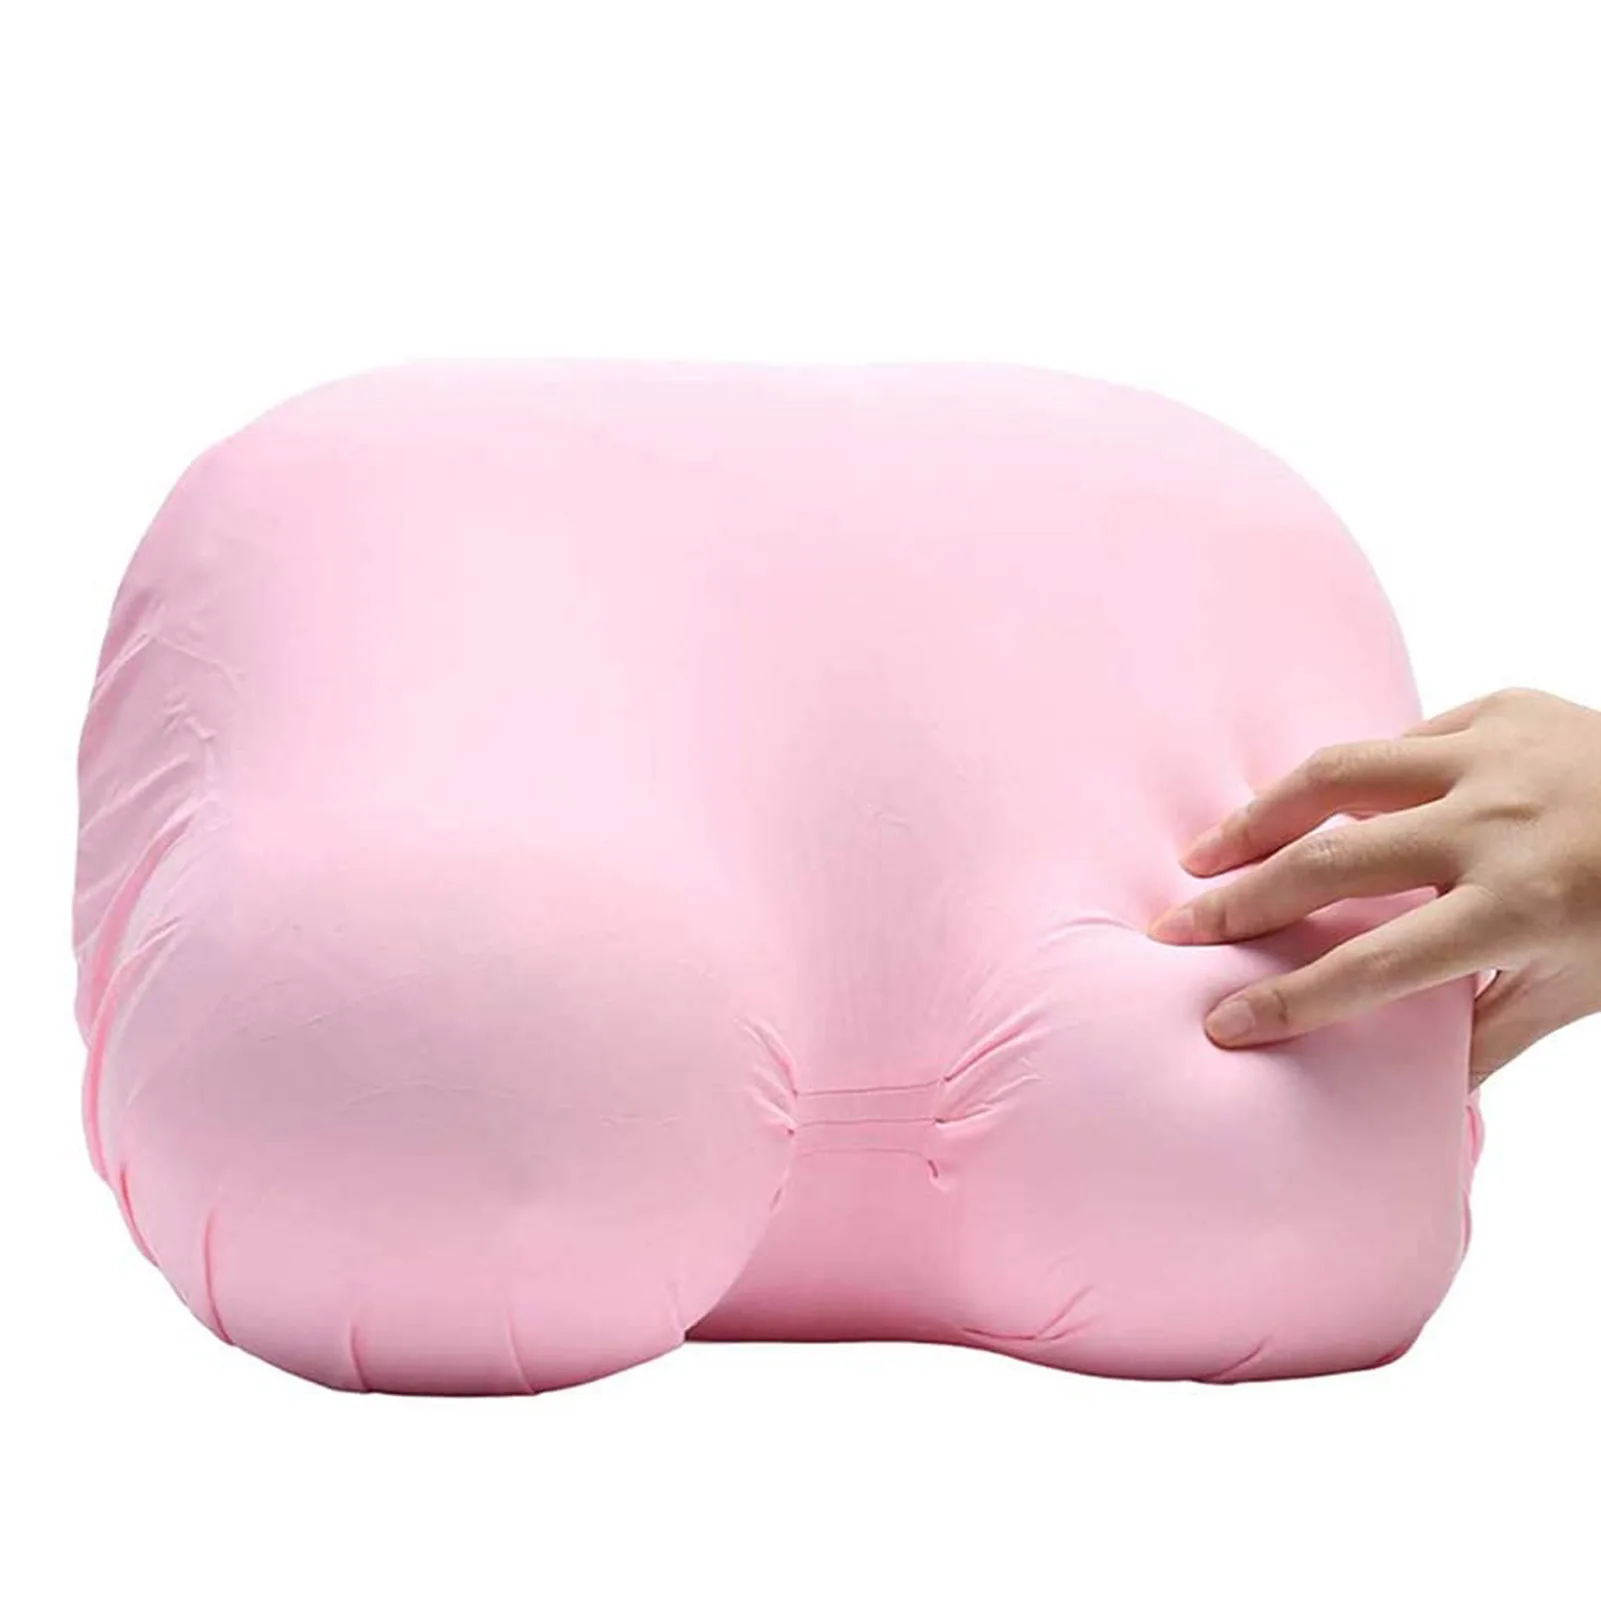 HHYSPA Boobs Breasts Pillow Cushion Latex Chest of Comfortable Boobs Pillow Sexiest and Most Realistic Boob Pillow Soft Memory Foam Sleep Pillows 3D Artificial Pillow For Party and Birthday Gift Blue 